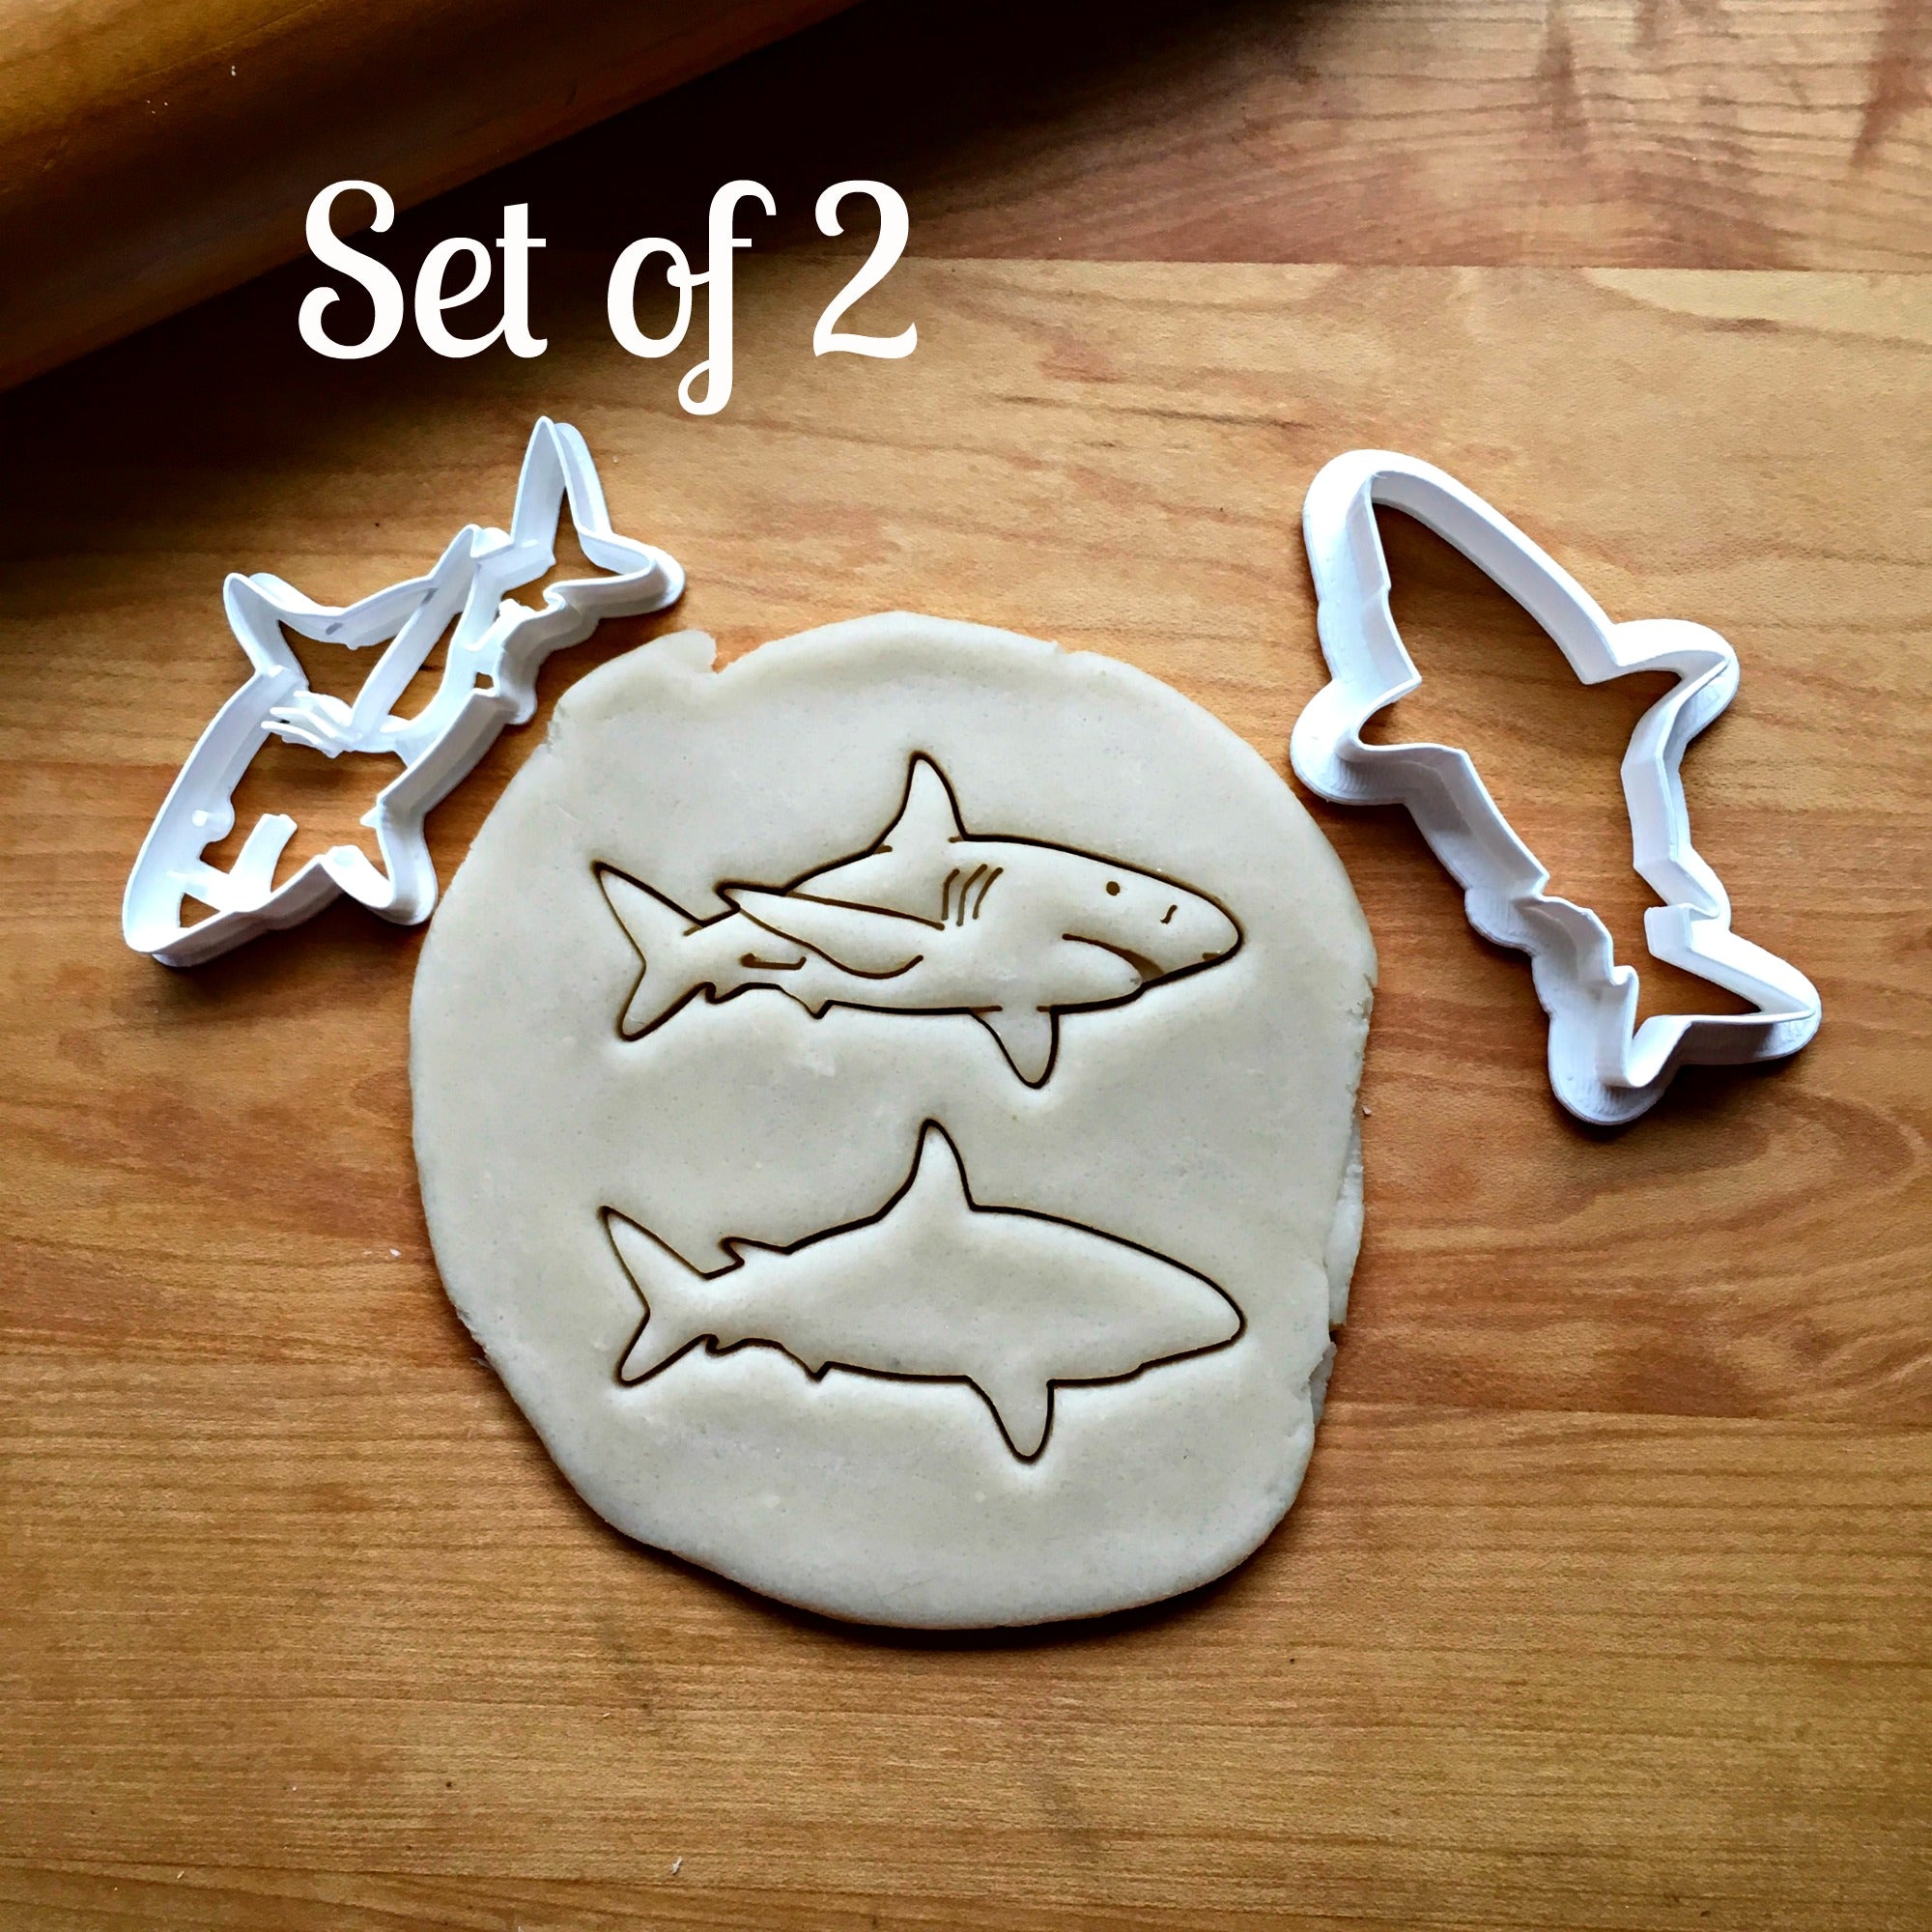 Set of 2 Great White Shark Cookie Cutters/Dishwasher Safe